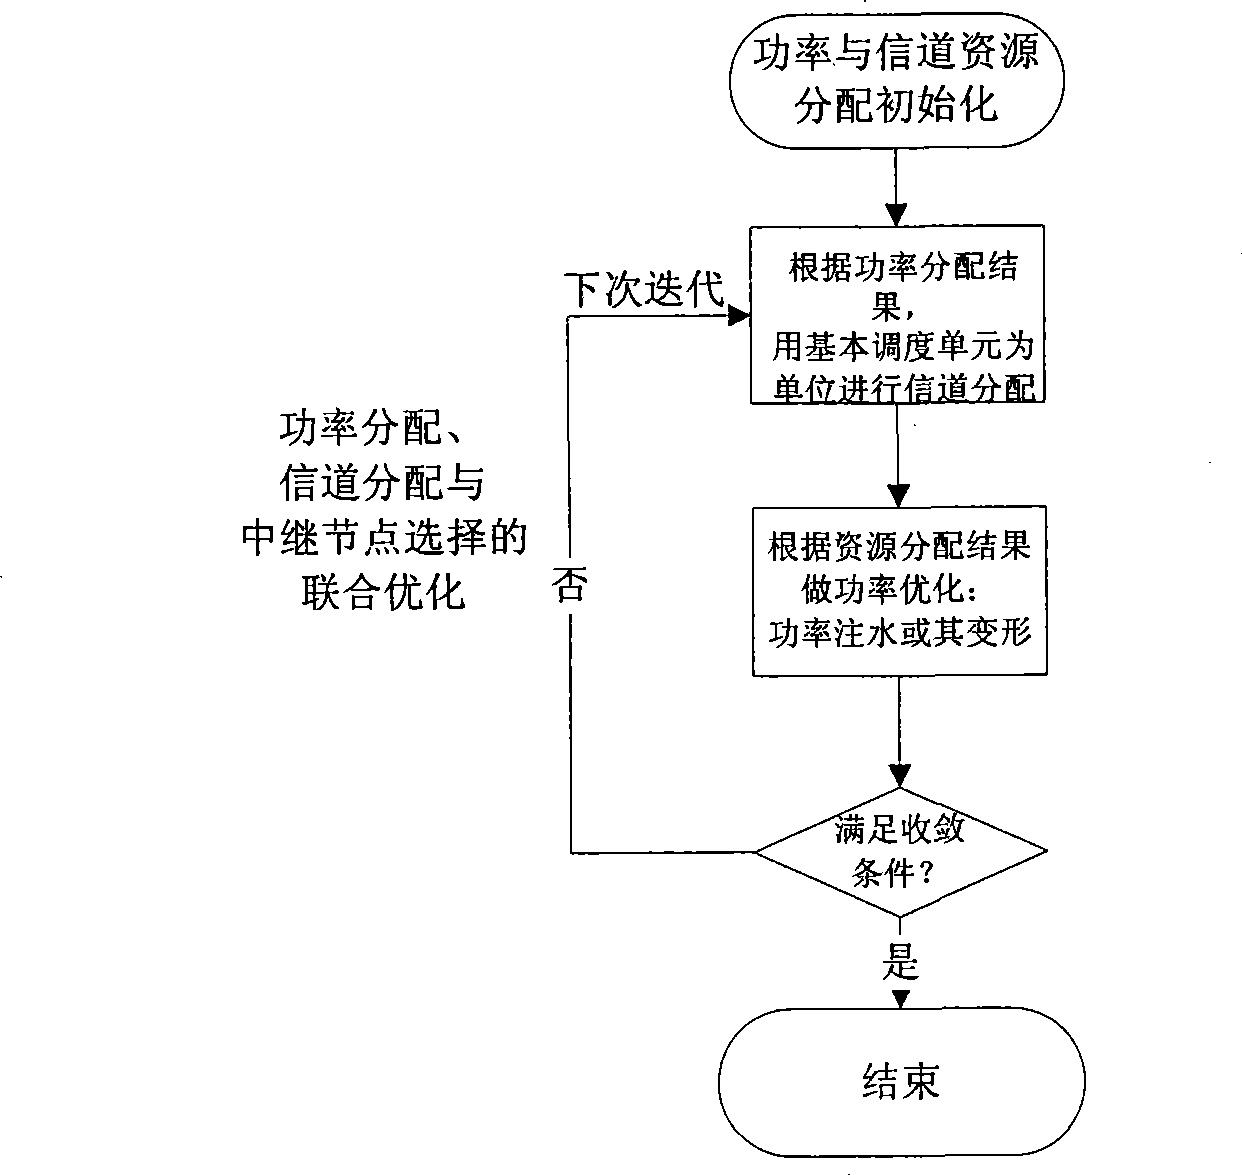 Power distribution, channel distribution and relay node selection combined optimization method